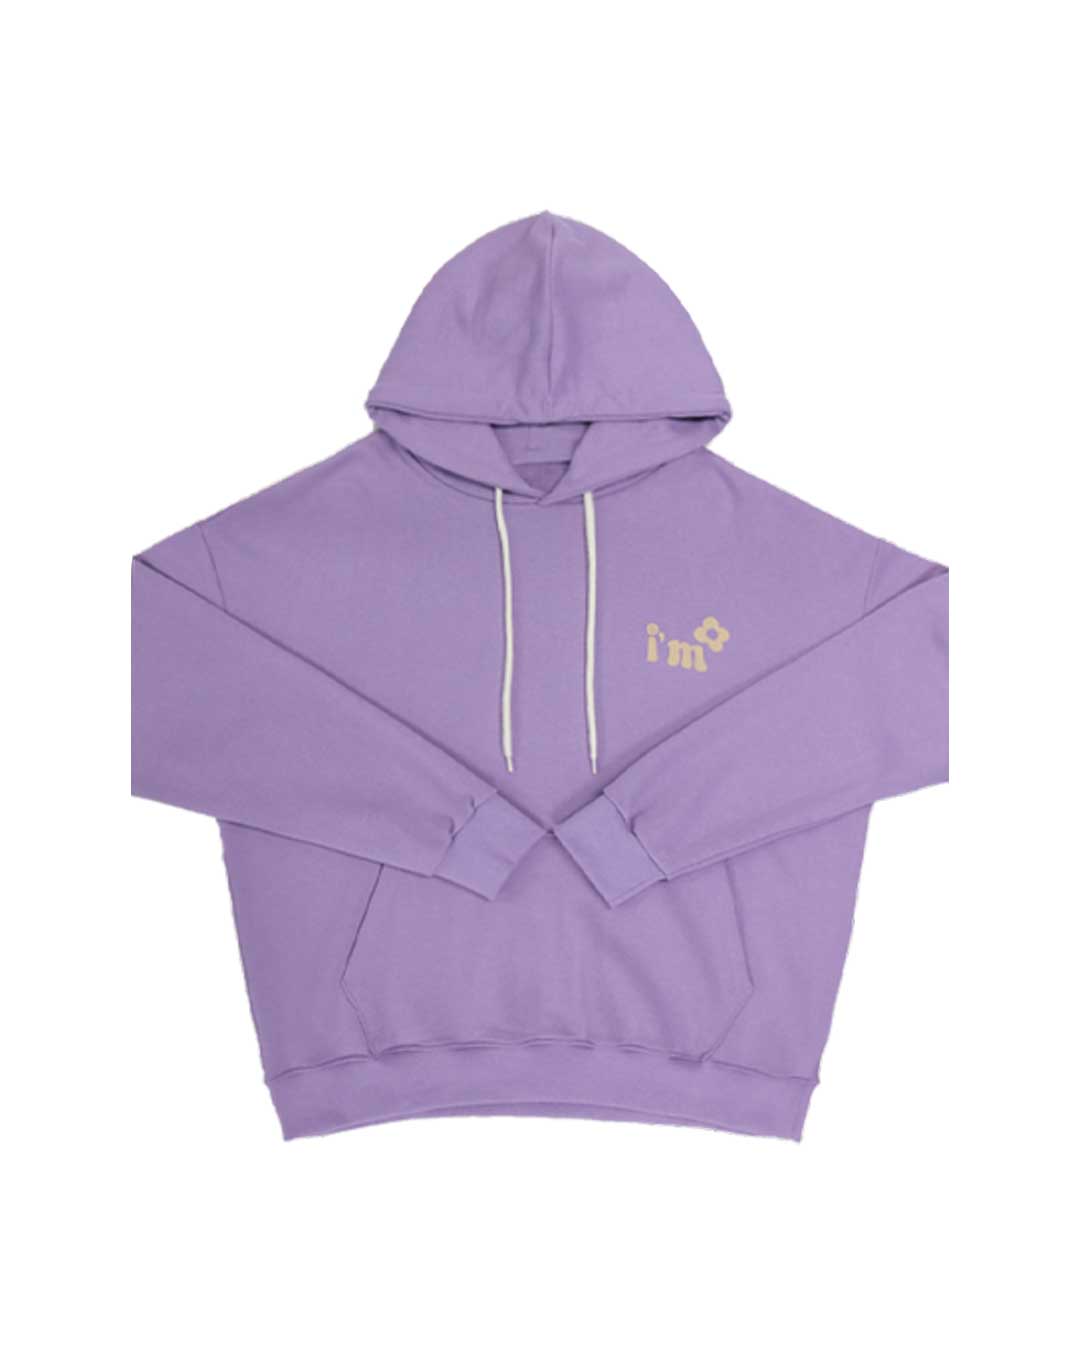 Im Oversized Fit Hoodie (2color)